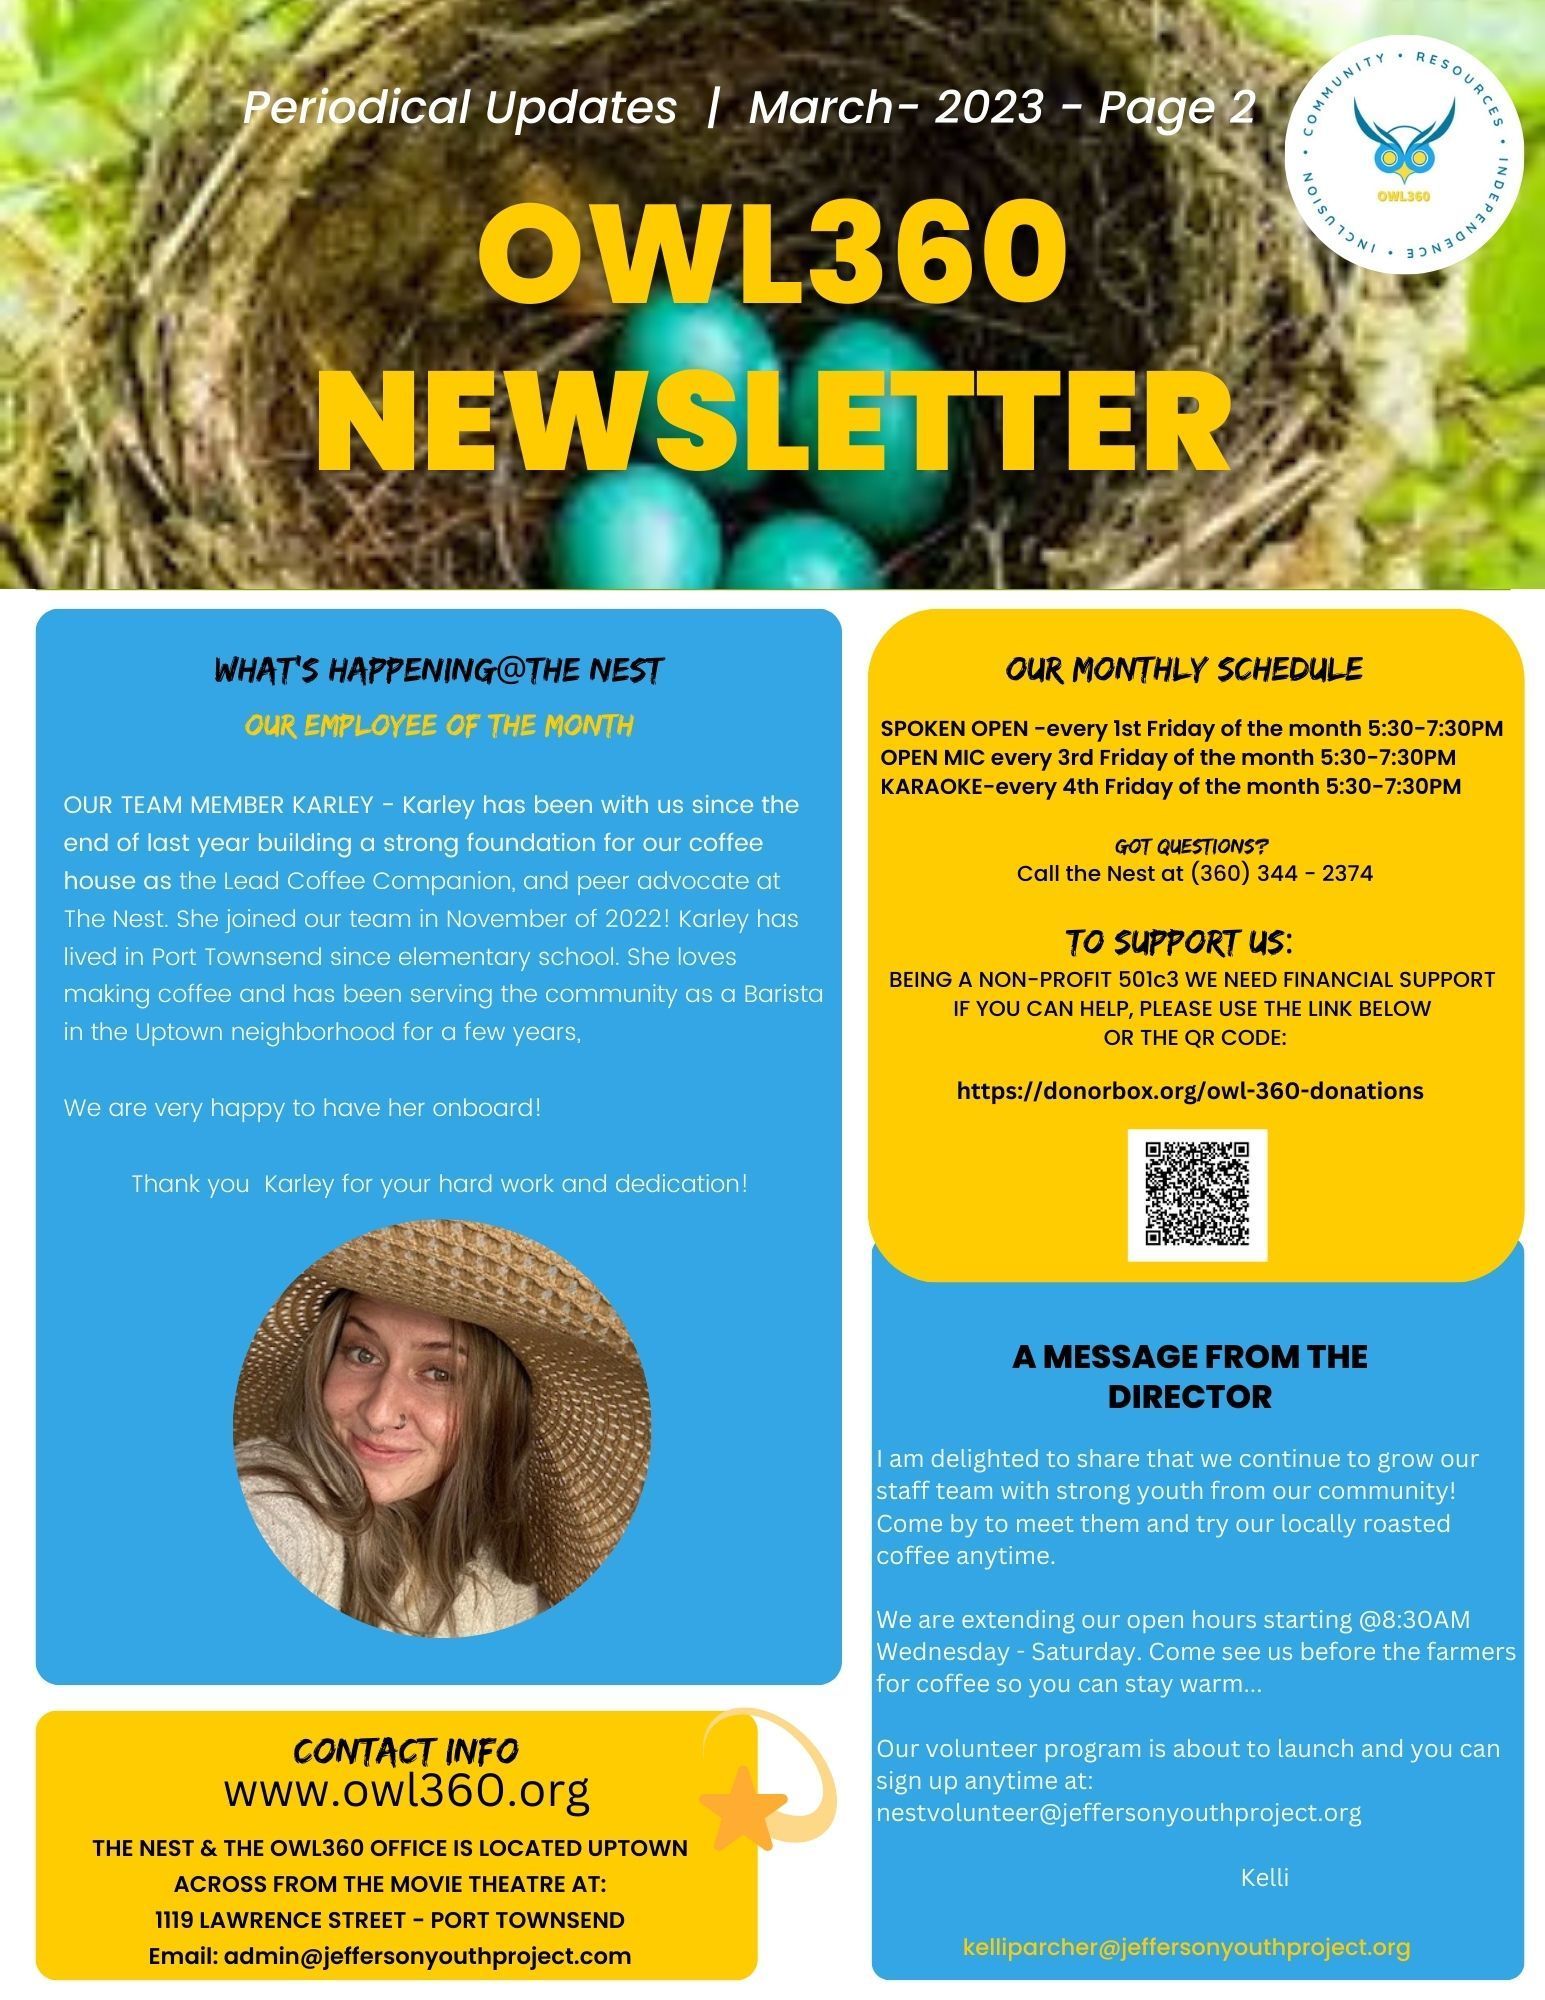 a woman in a straw hat is on the cover of an owl 360 newsletter .